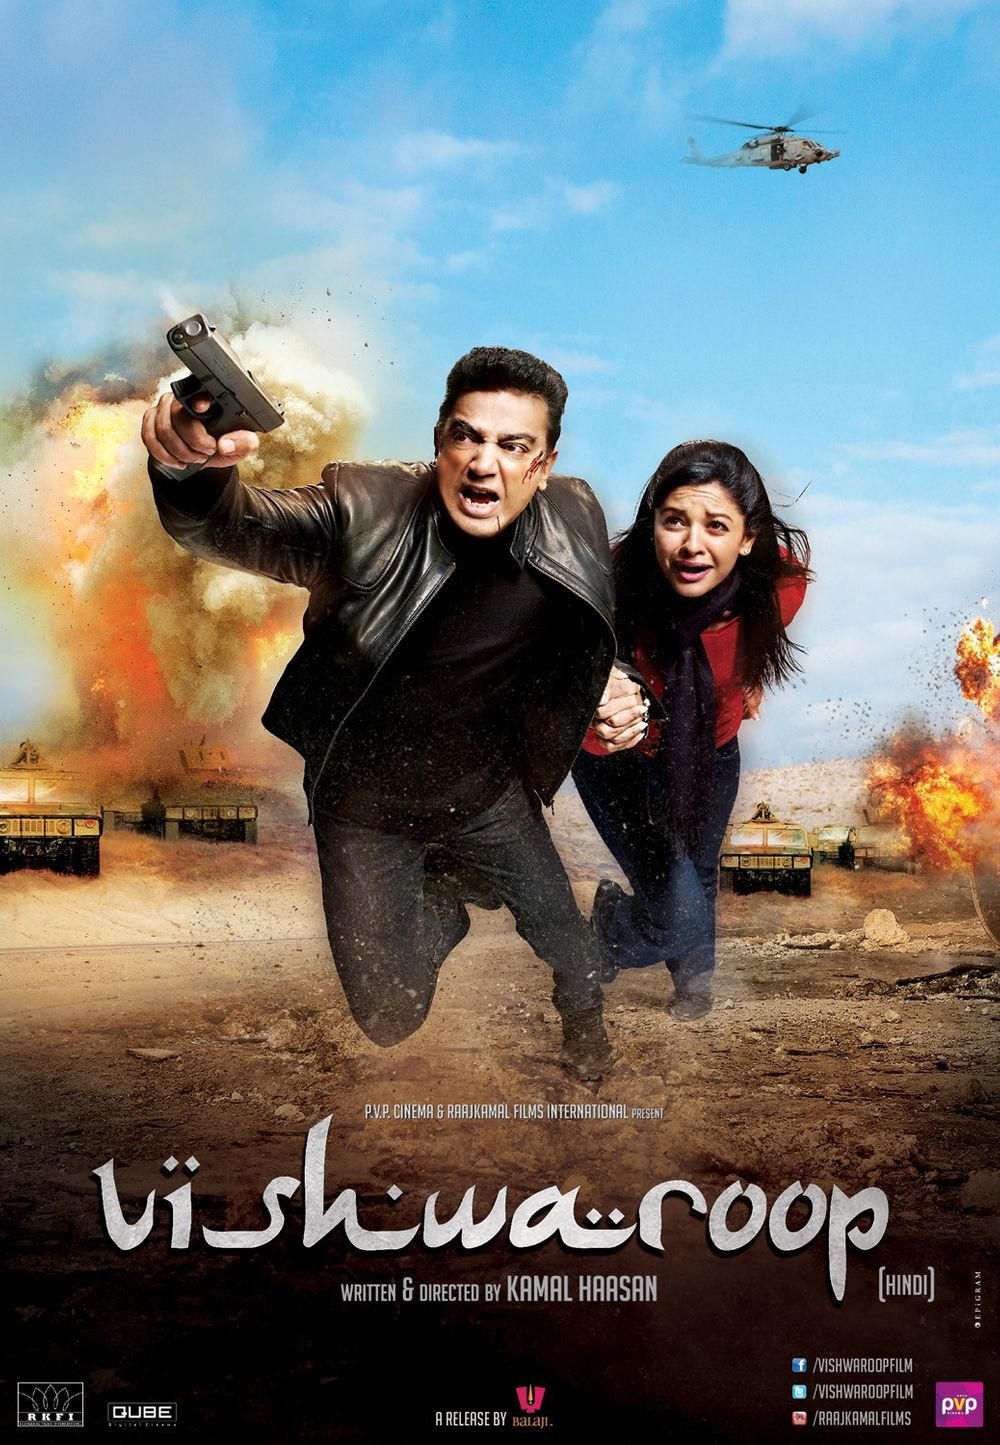 Vishwaroopam (2013) is one of tamil movies dubbed in hindi